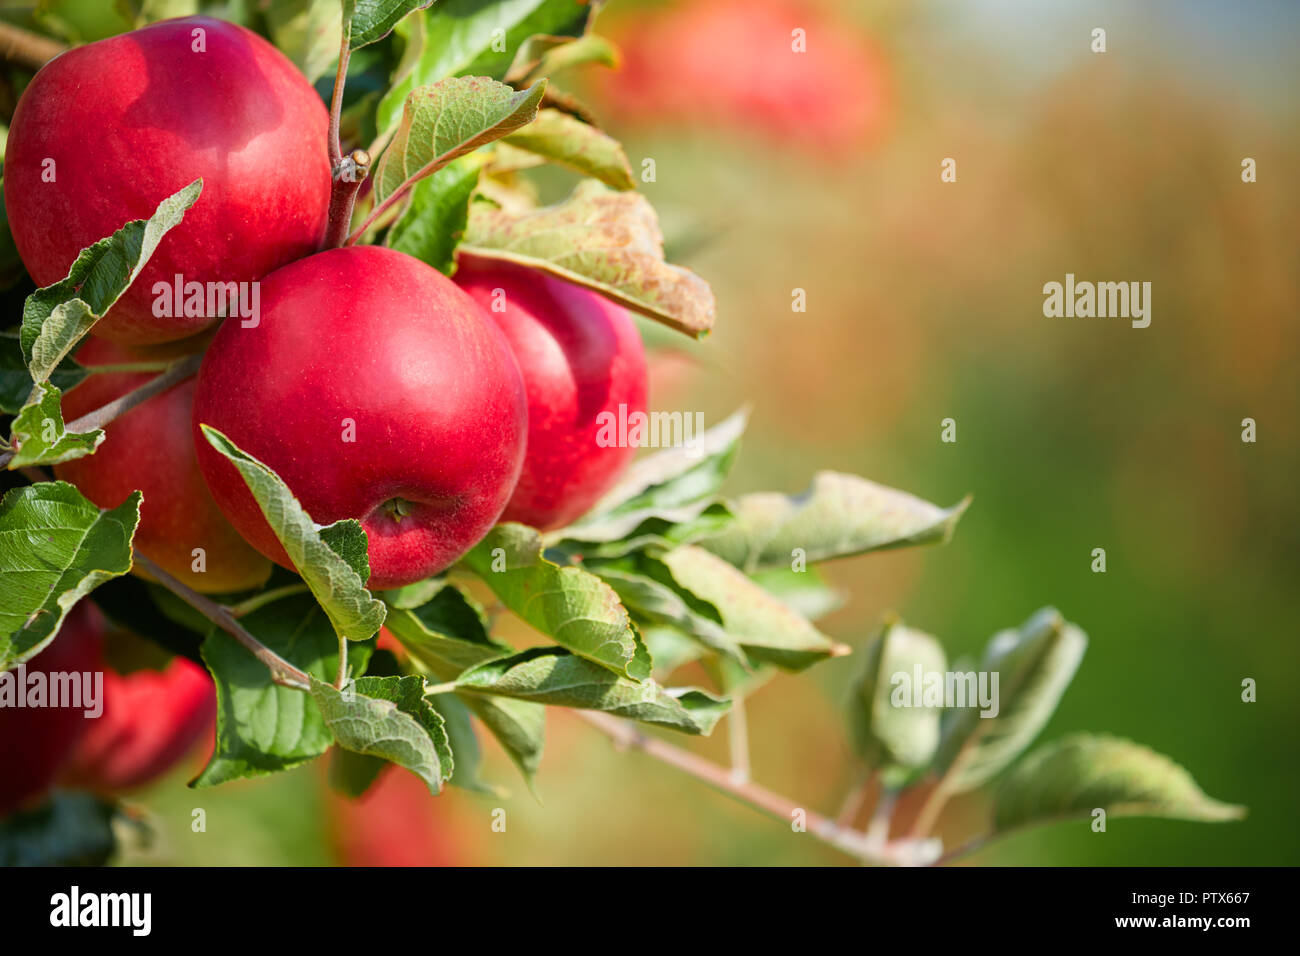 fresh red apples on a tree Stock Photo